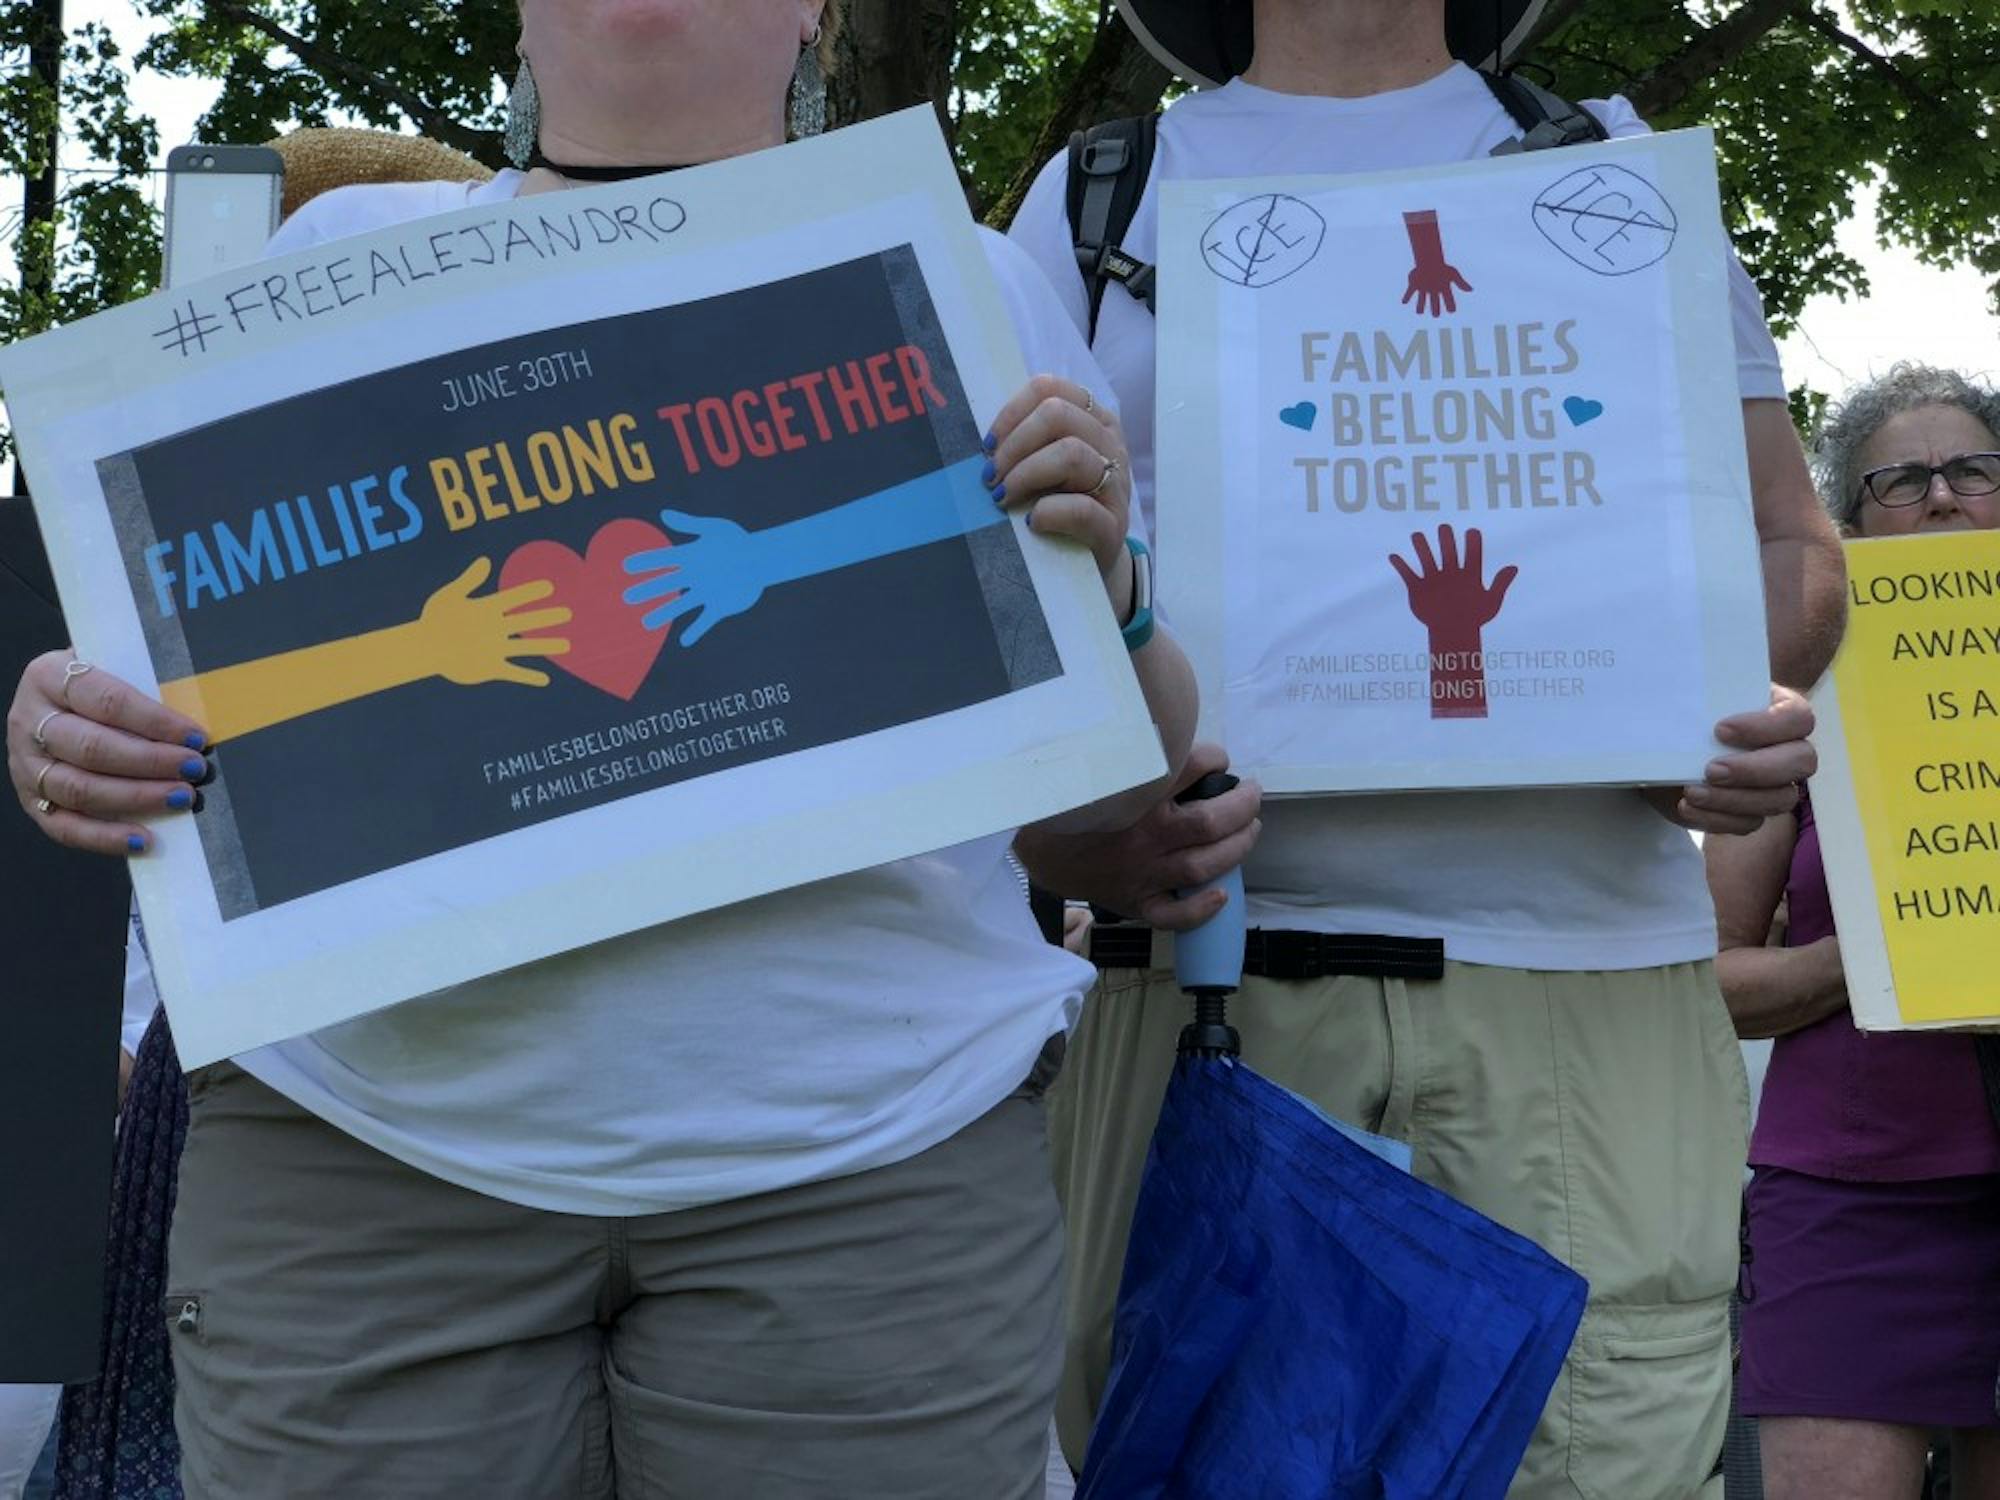 Community members held signs as they&nbsp;gathered on the Green to protest the&nbsp;Trump administration's immigration policies.